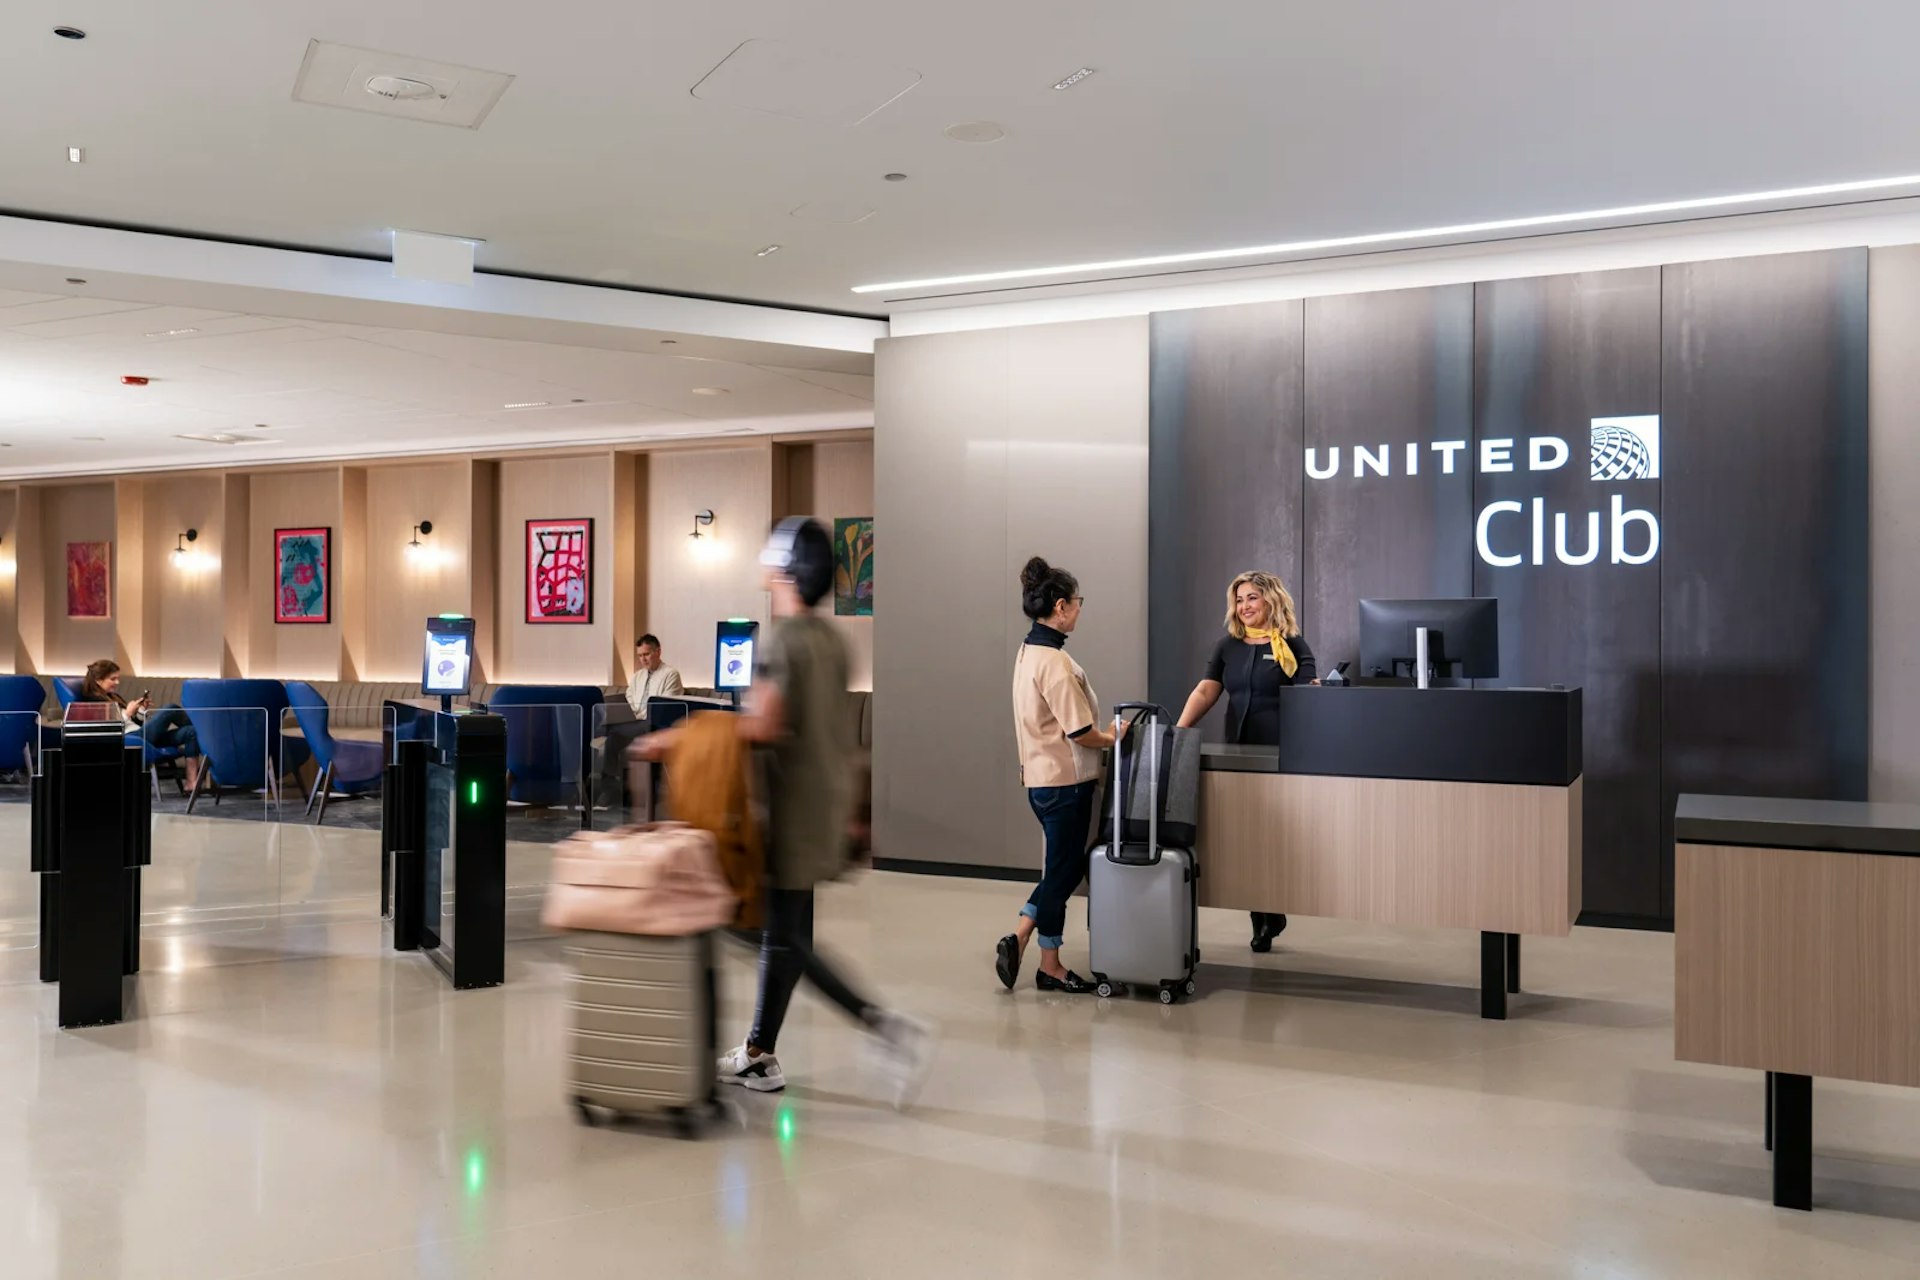 The new United Club at Chicago's O'Hare International Airport